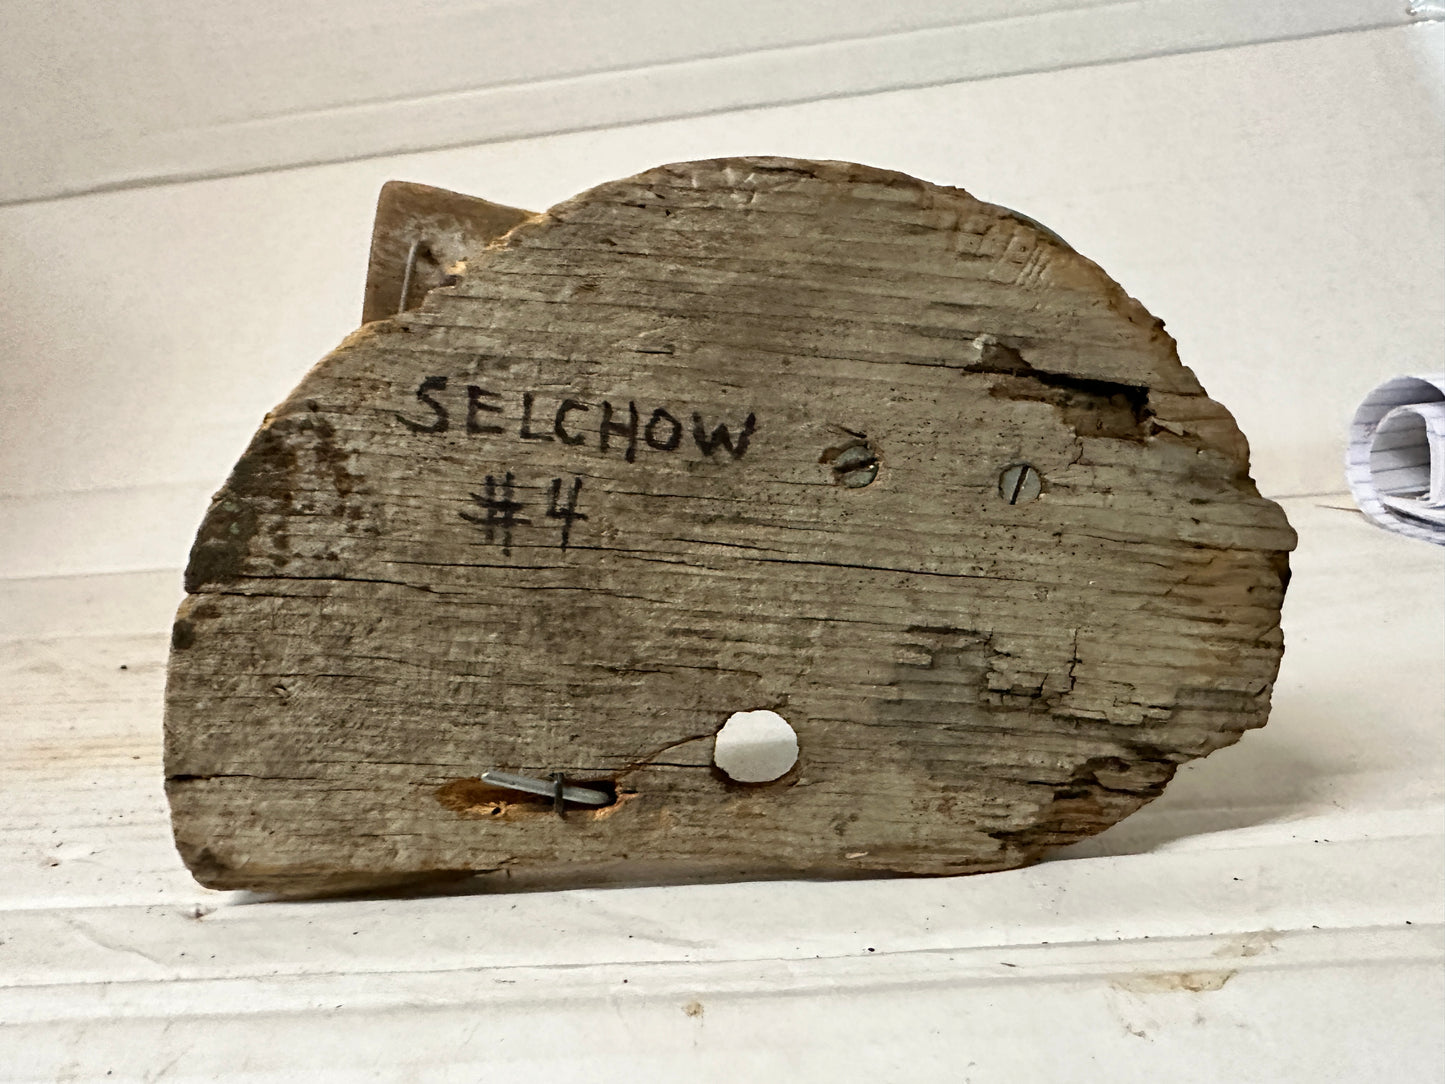 Signed Roger Selchow Wood and Metal Wire Sculpture: "Selchow # 4"